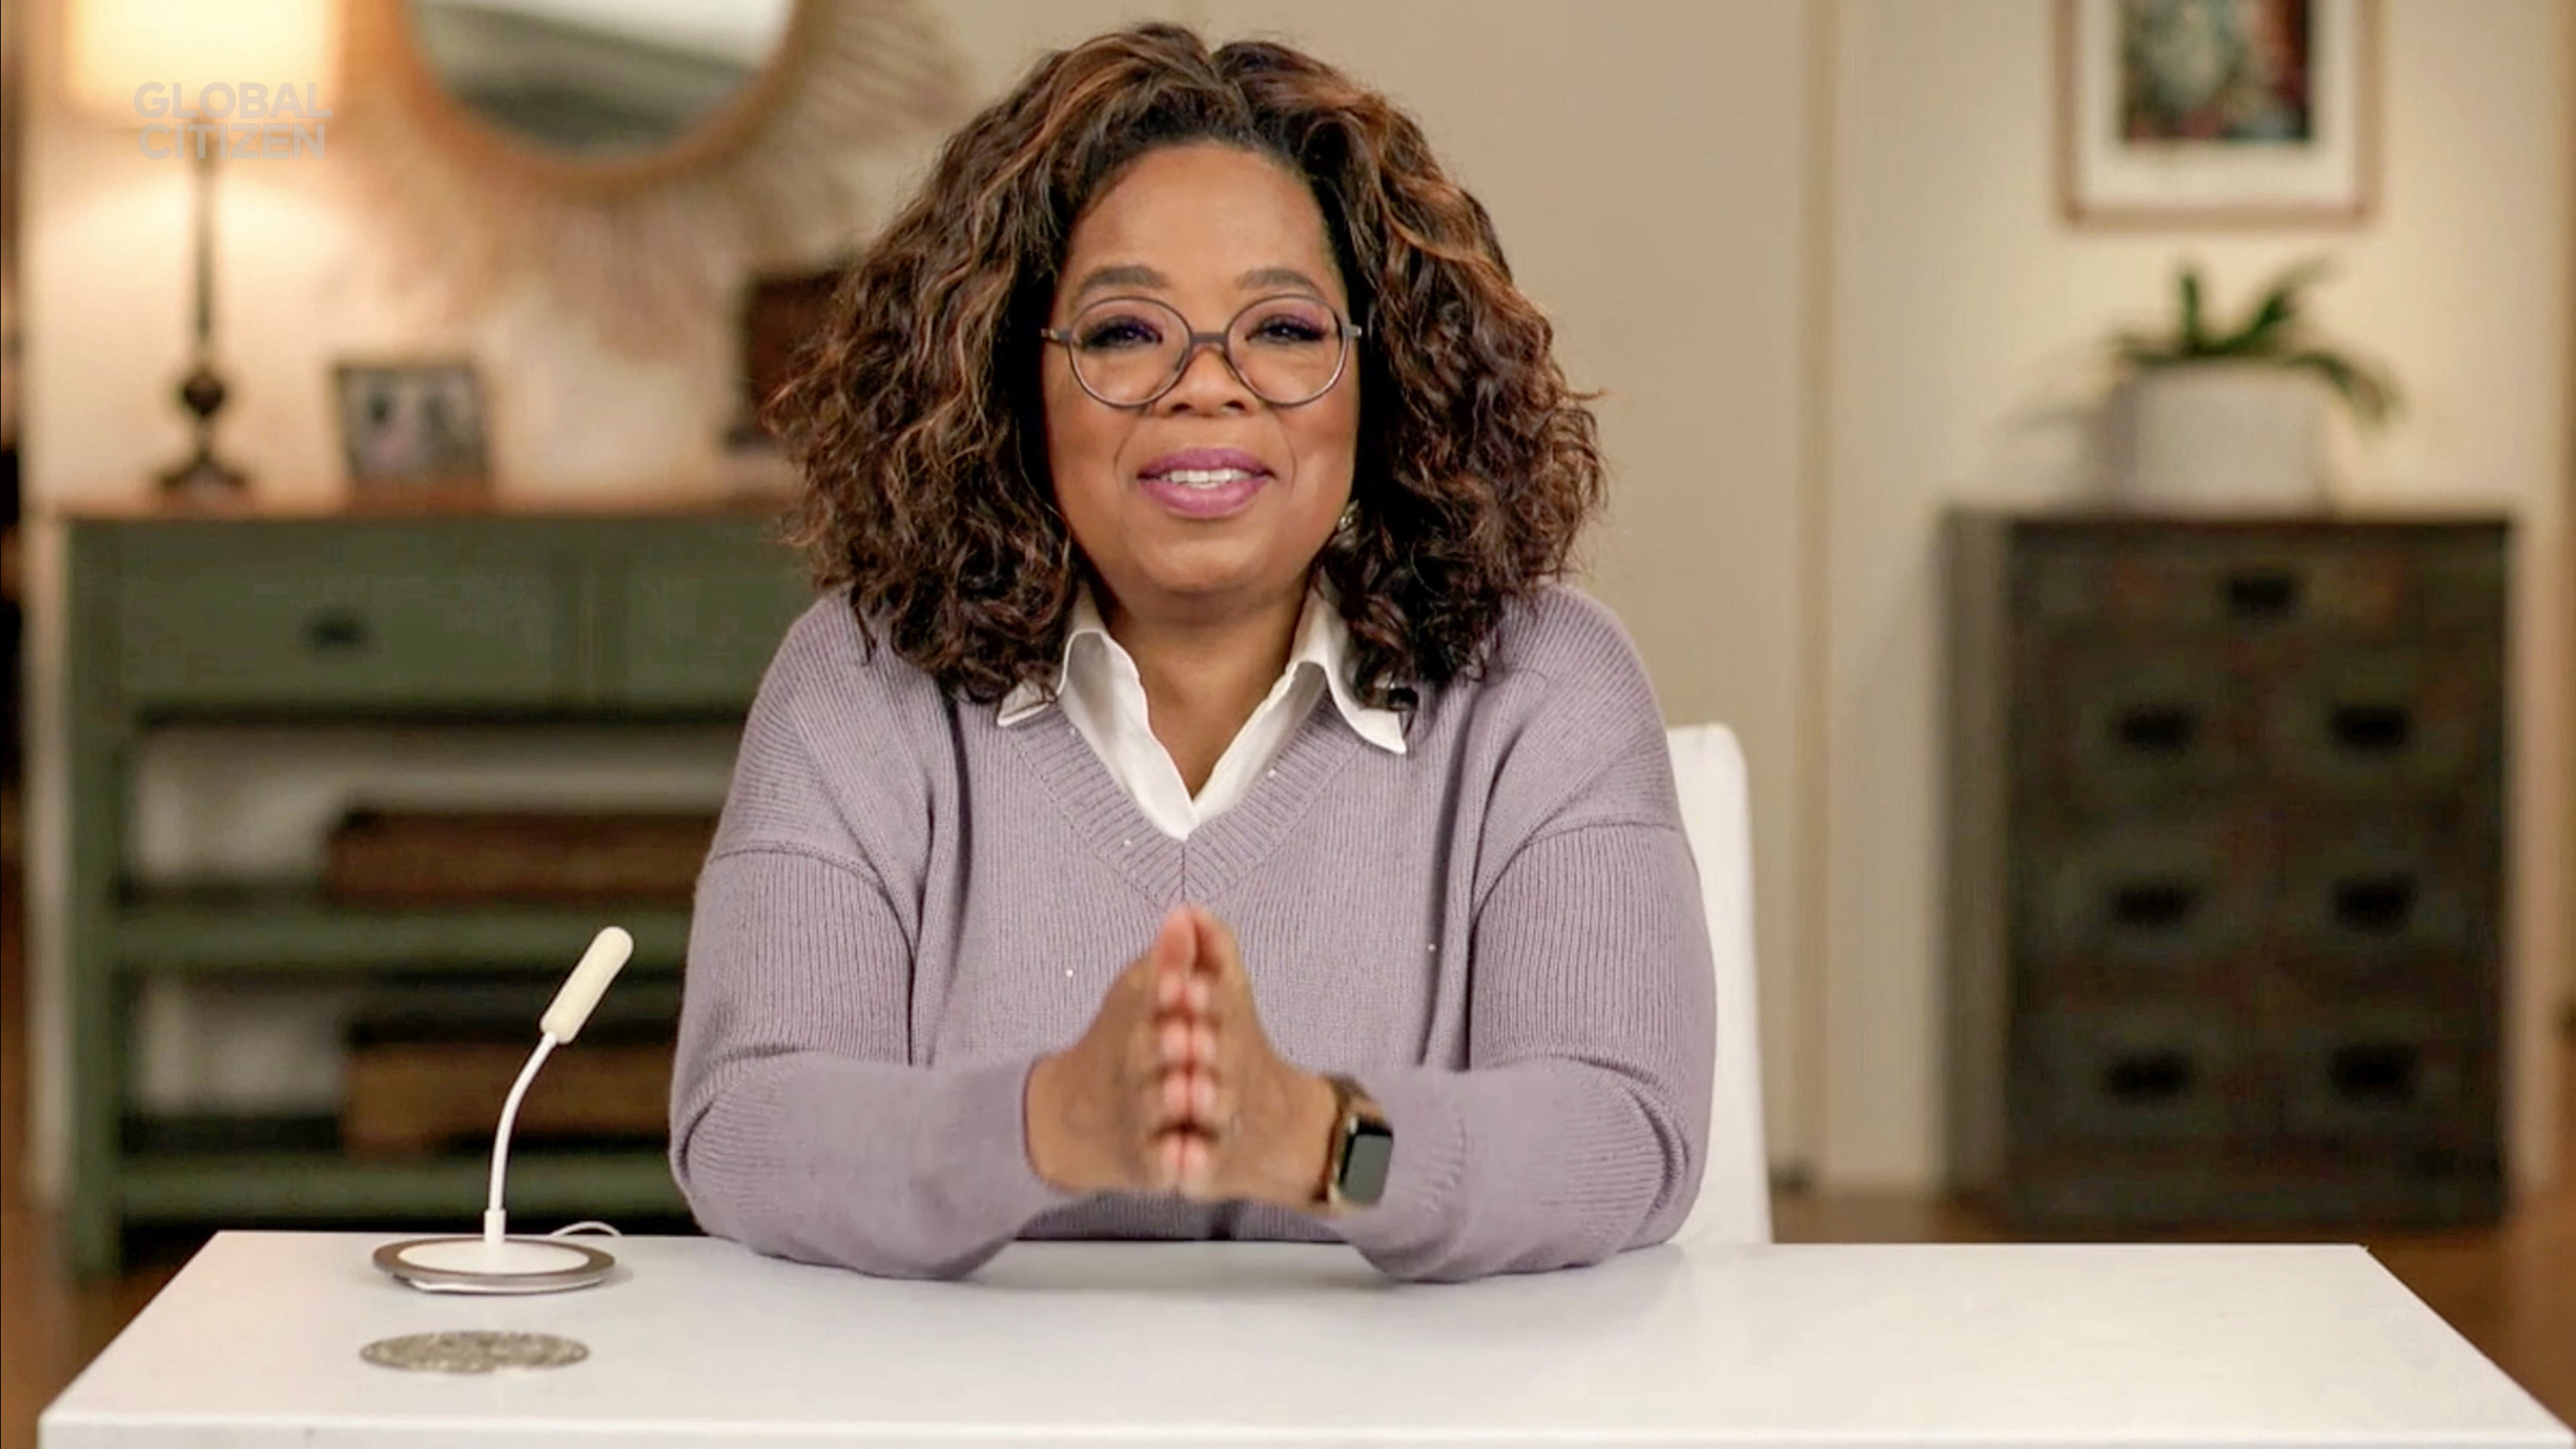 Oprah at a desk with her hands clasped together